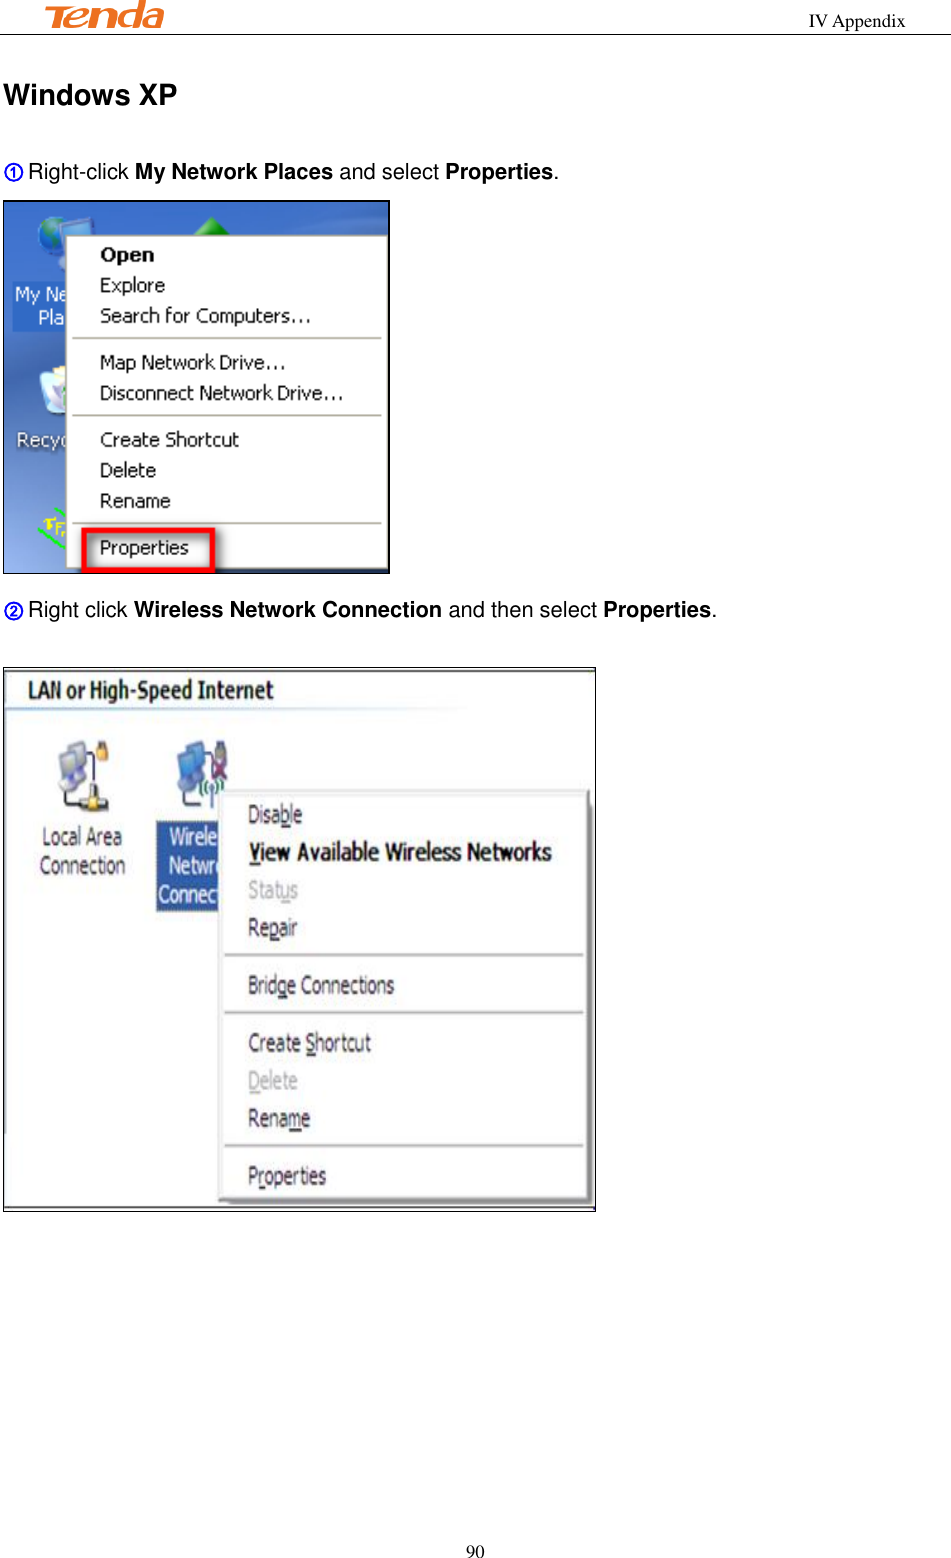                                                            IV Appendix         90 Windows XP ① Right-click My Network Places and select Properties.  ② Right click Wireless Network Connection and then select Properties.   